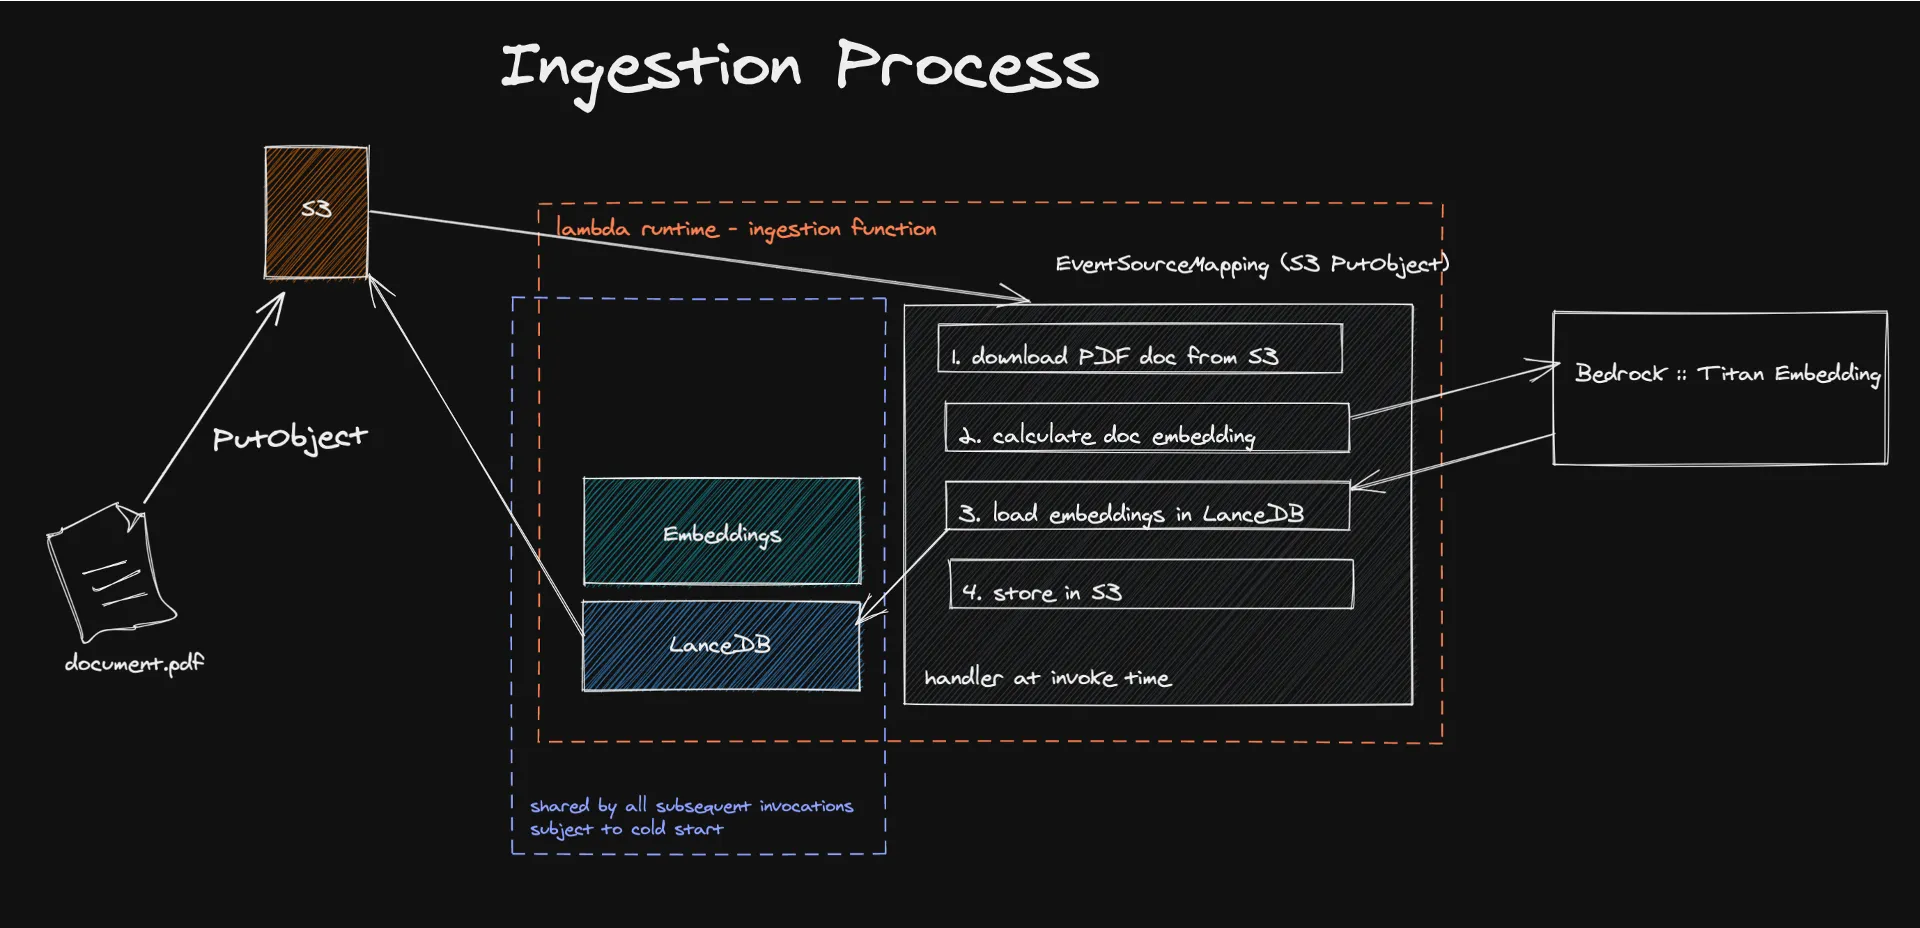 A sketched diagram depicting the ingestion workflow for pdf documents